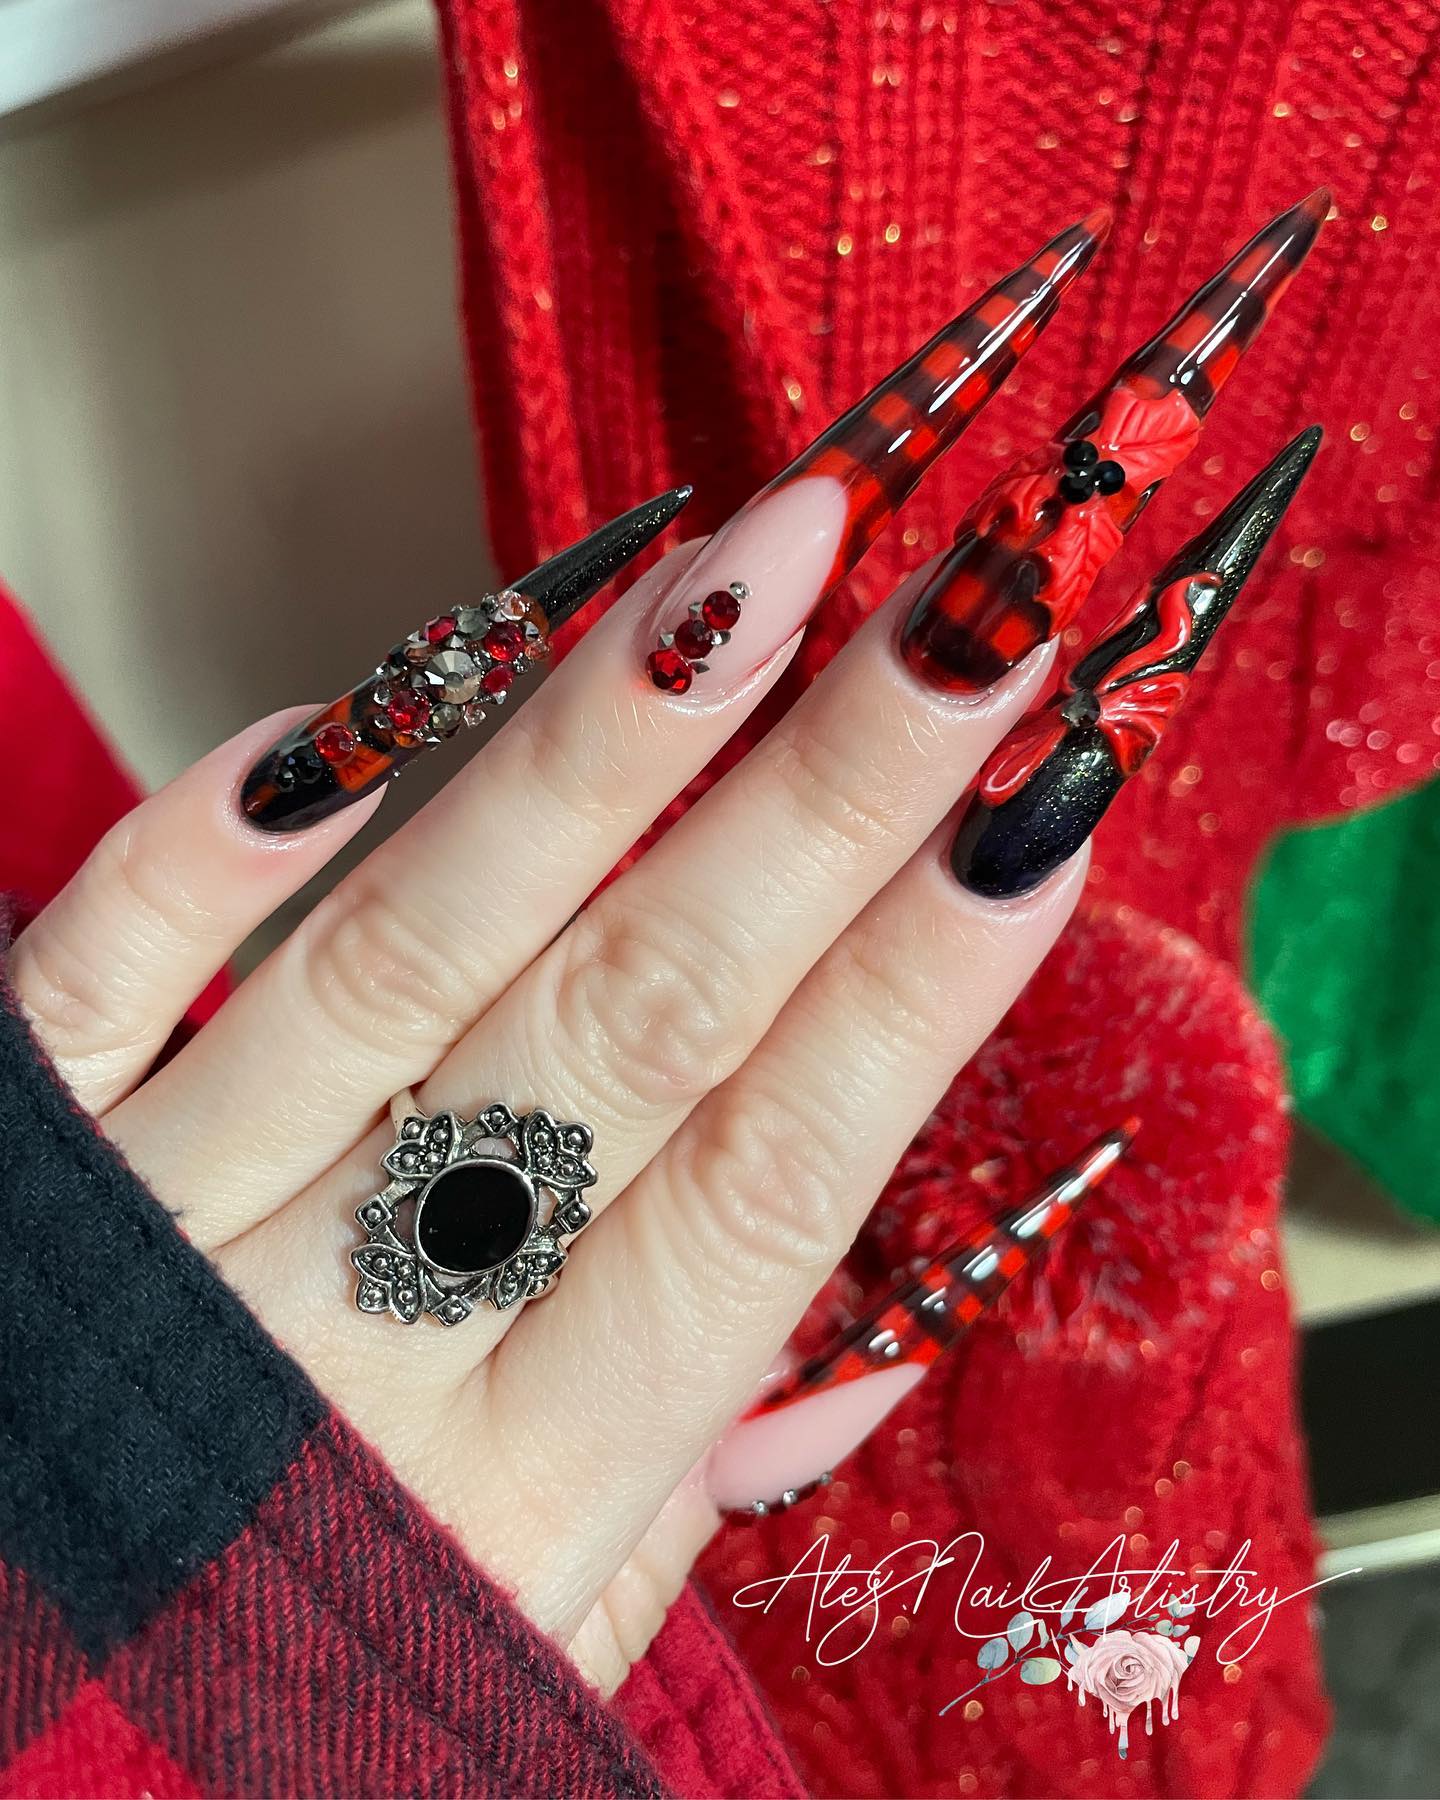 It seems like it will take a very long time to achieve this nail art but don't worry. A professional nail artist can do it perfectly. Christmas is a perfect time of the year to celebrate, so let's have fun with your nails.